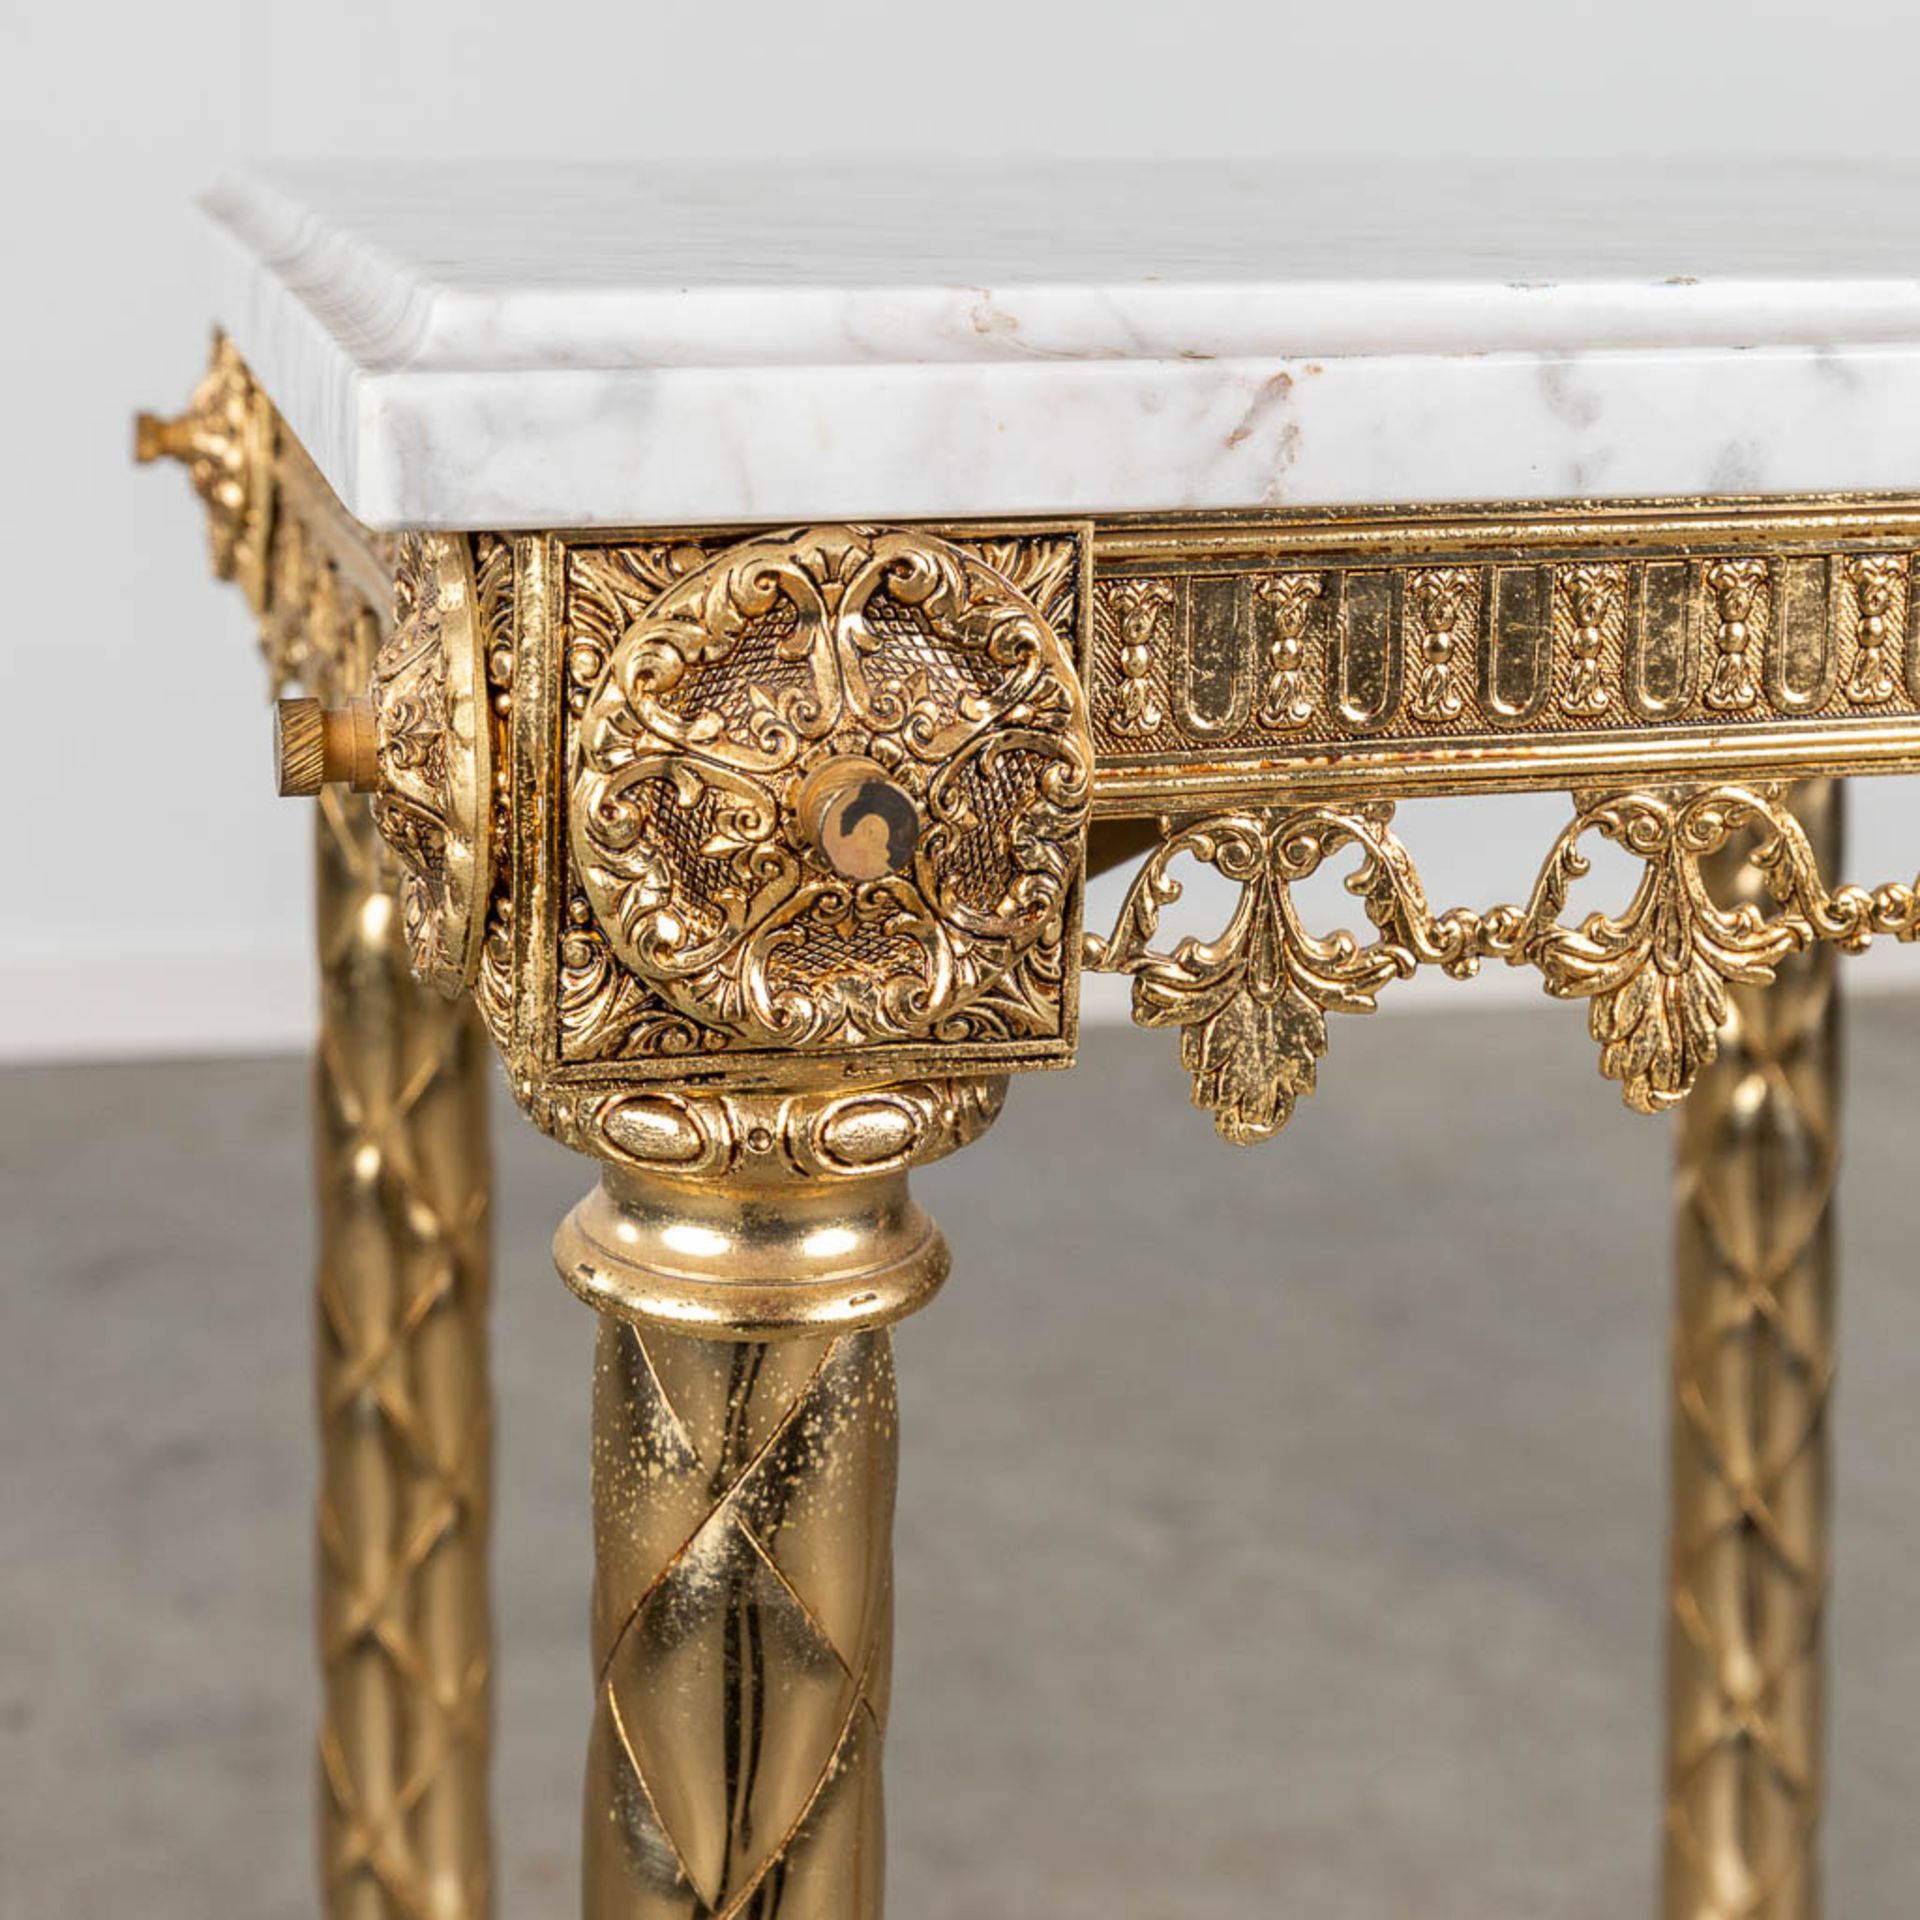 A pedestal, brass and white marble. 20th C. (L: 34 x W: 34 x H: 72 cm) - Image 7 of 11